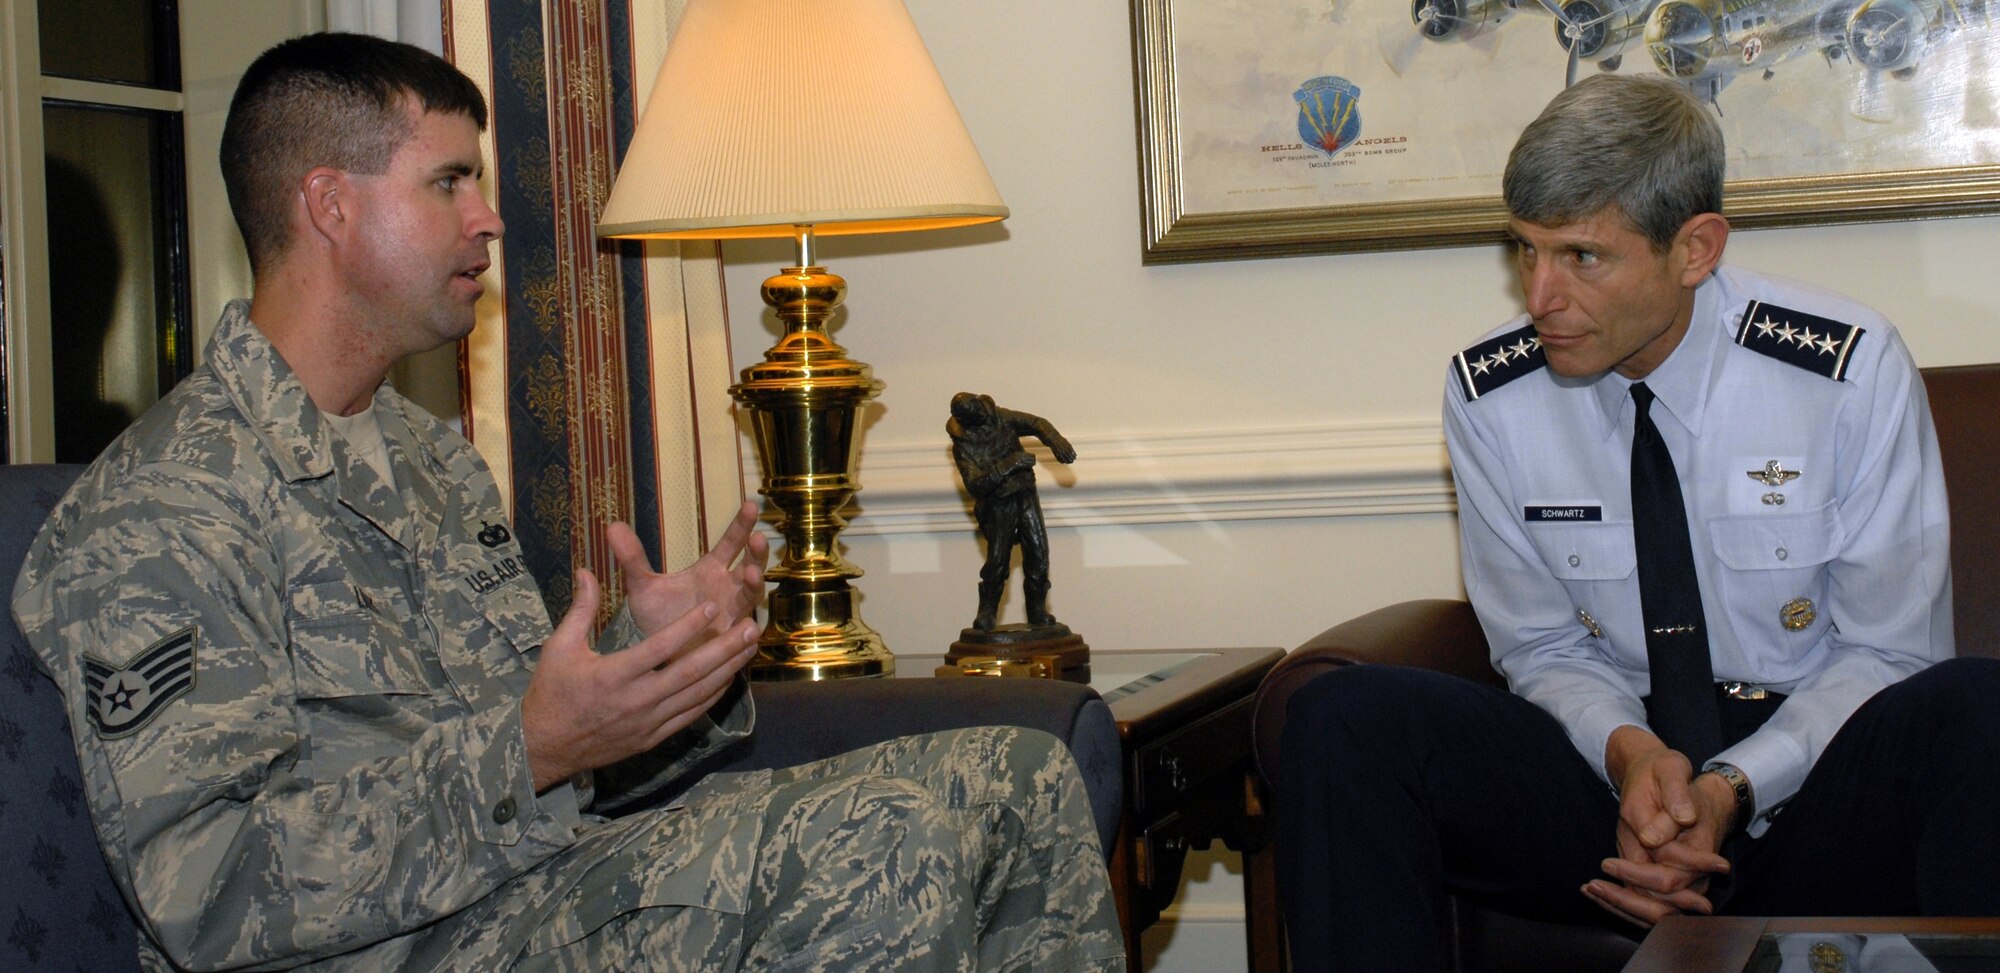 Staff Sgt. Scott Lilley, a Security Forces Airman who was wounded in Iraq, was invited to visit General Schwartz, Chief of Staff of the Air Force, in his office in December 2008. Sergeant Lilley suffered a severe head wound when his convoy was attacked in Iraq and was not expected to survive. General Schwartz and Sergeant Lilley discussed the sergeant's wounds, his goals, and the care the Air Force provides to its wounded Airmen. Sergeant Lilley praised the care he has received and told the general of his plans to return to active duty as a Security Forces Instructor. He recently completed the Air Force Basic Instructor Course at Lackland Air Force Base, Texas. Sergeant Lilley and his parents were also guests of President Bush at the White House Christmas party. (courtesy photo)